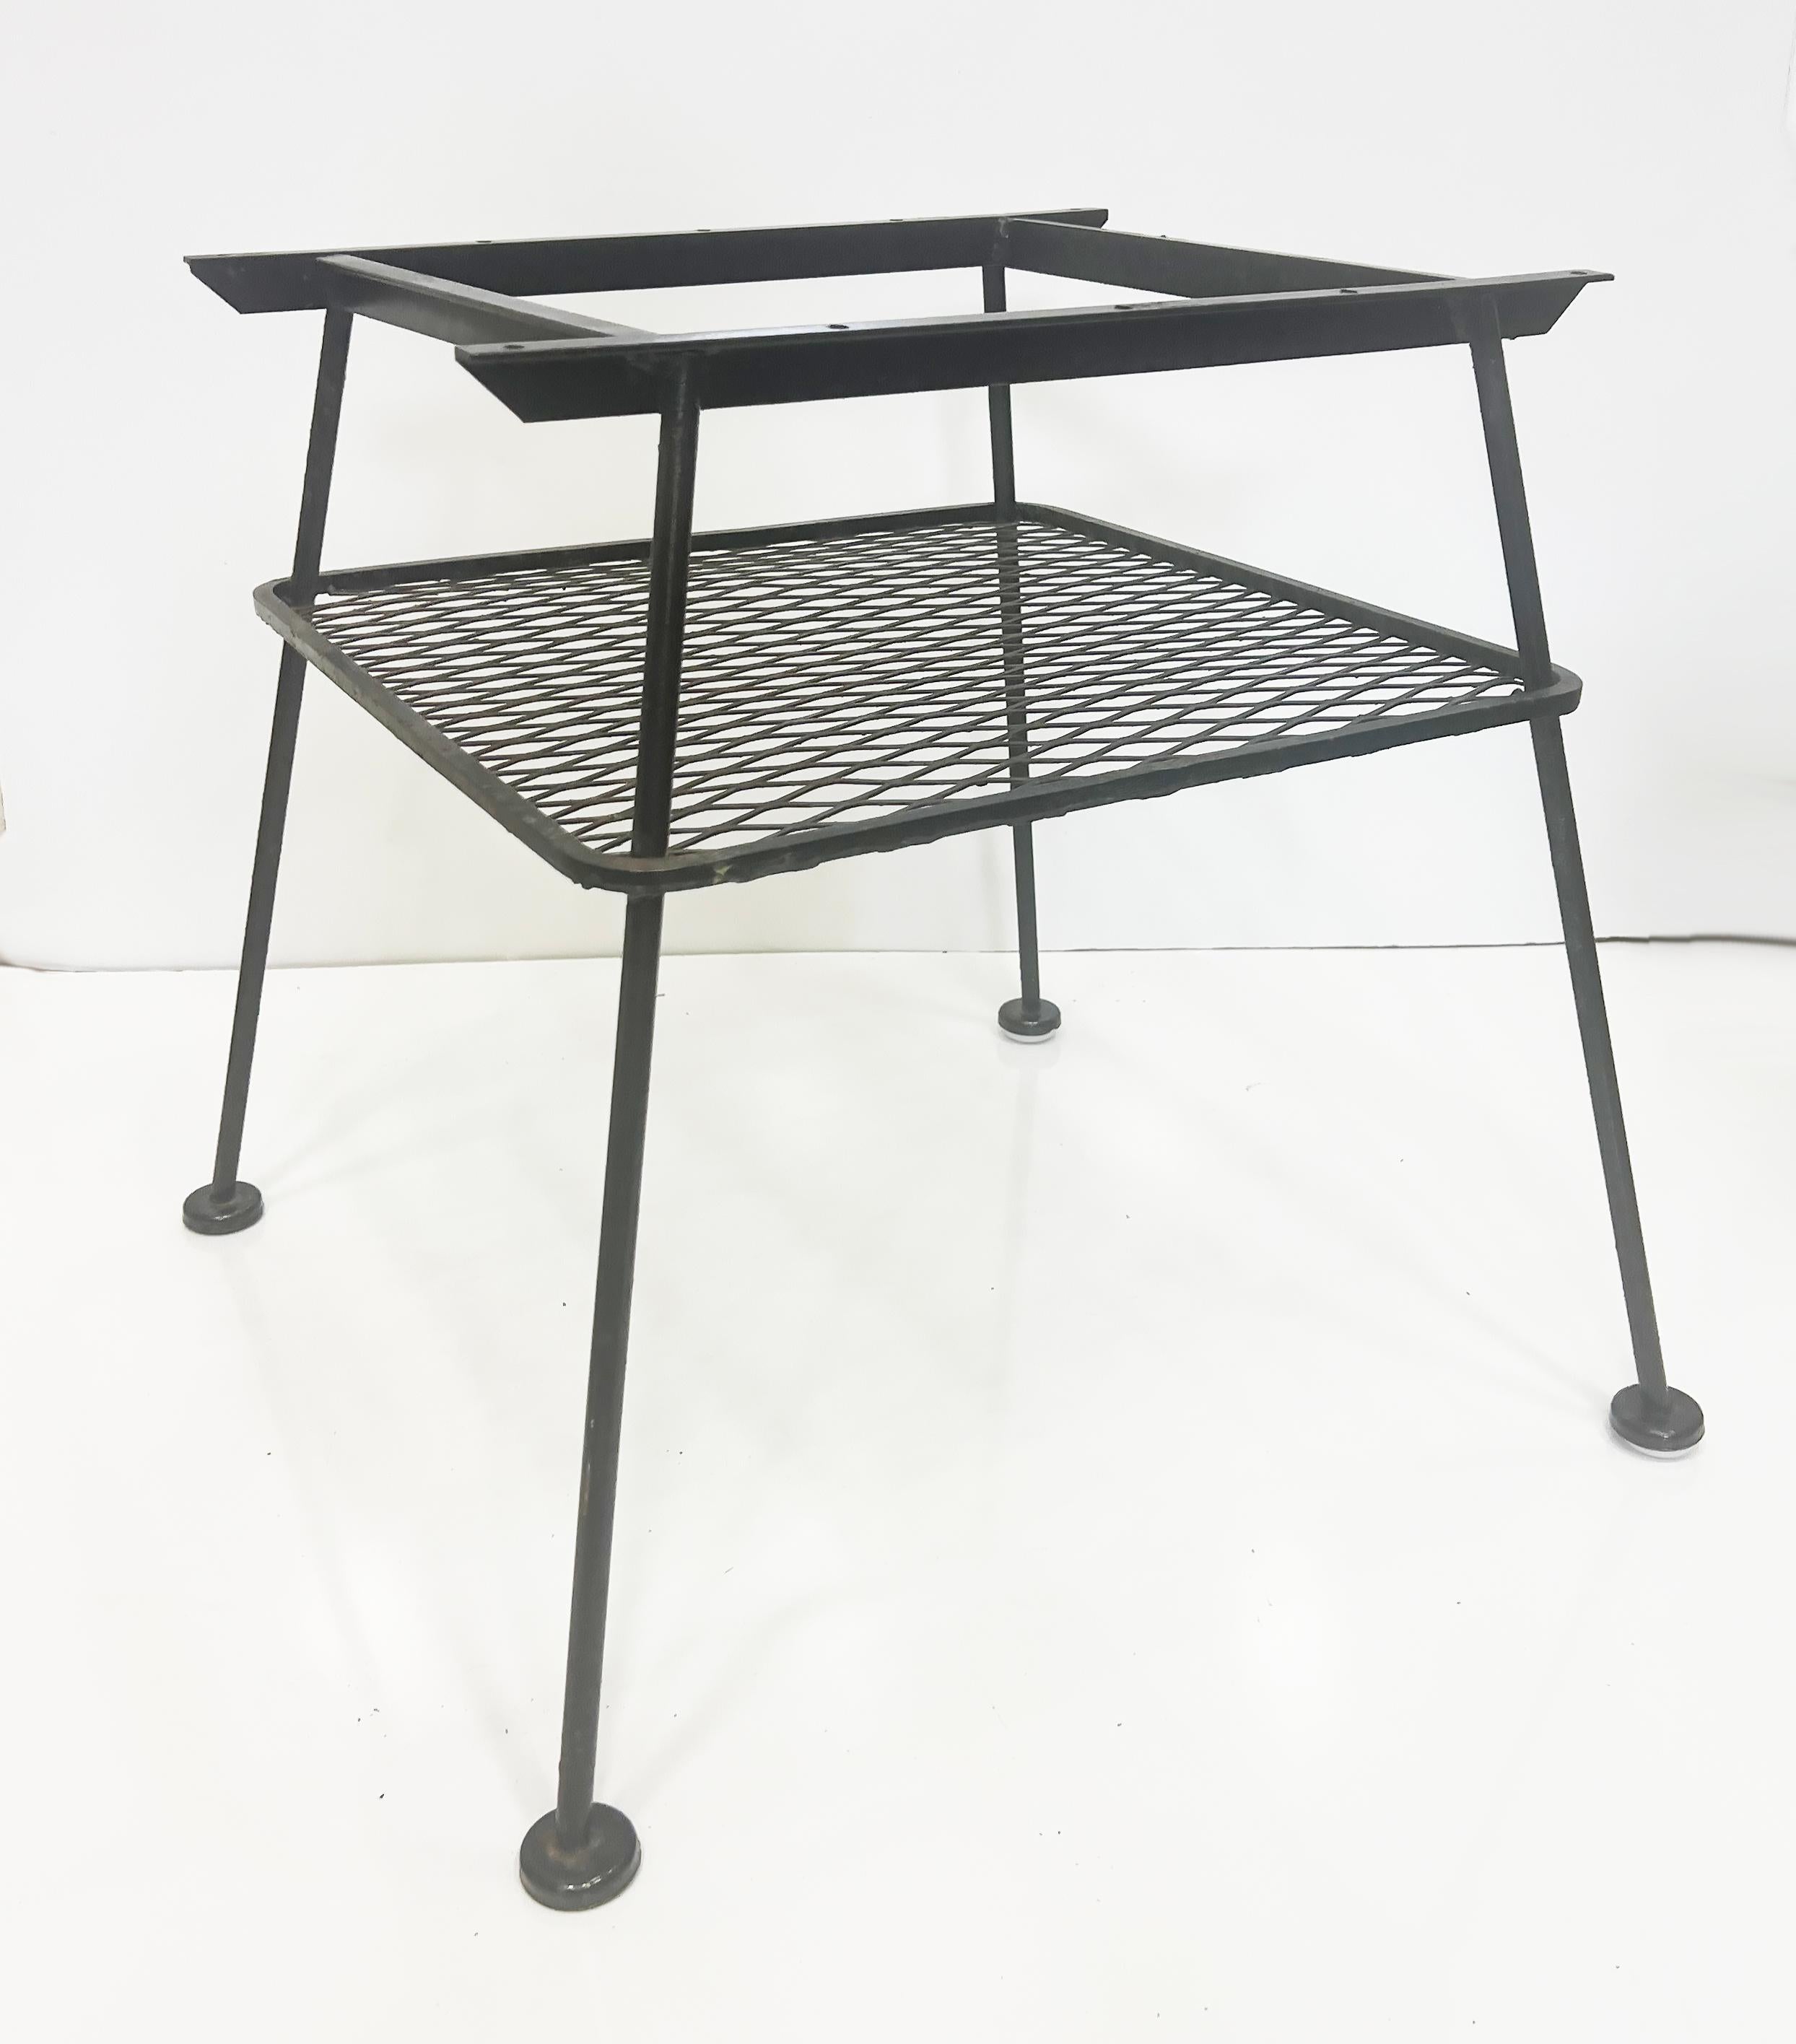 20th Century Mid-century Woodard Sculptura Iron Garden Table with Marble Top Added For Sale